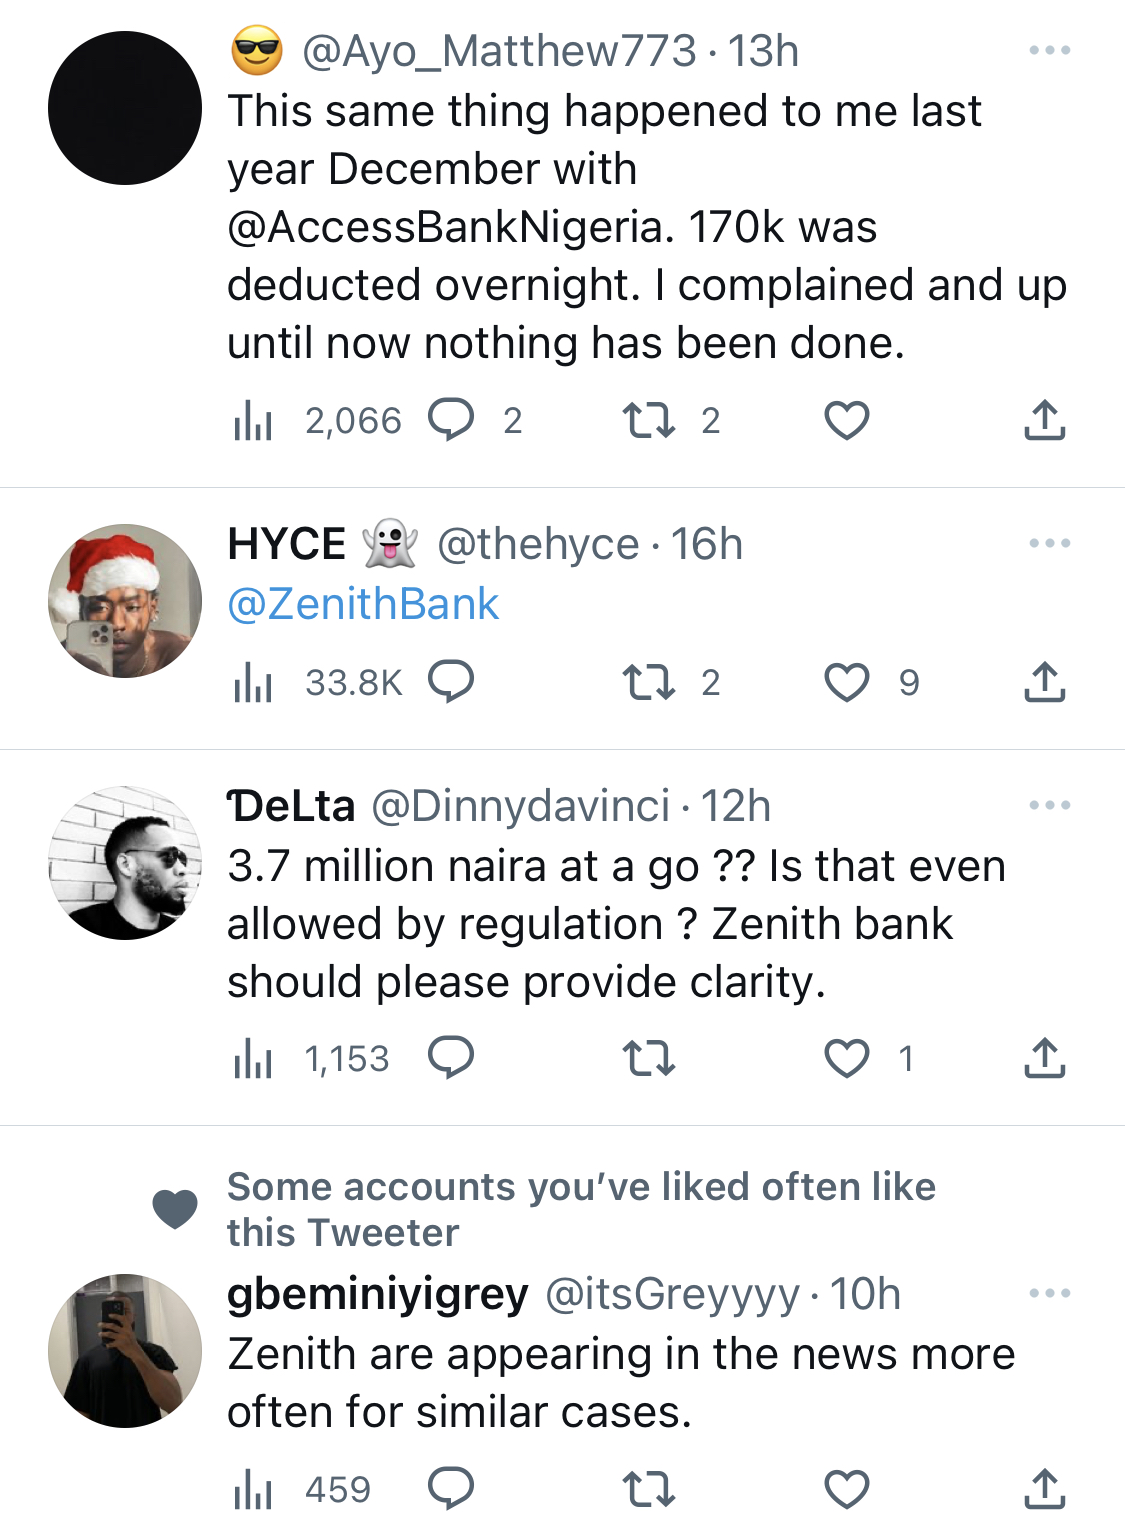 Return my money - Lady accuses Zenith Bank of Withdrawing N4M from her account [video]